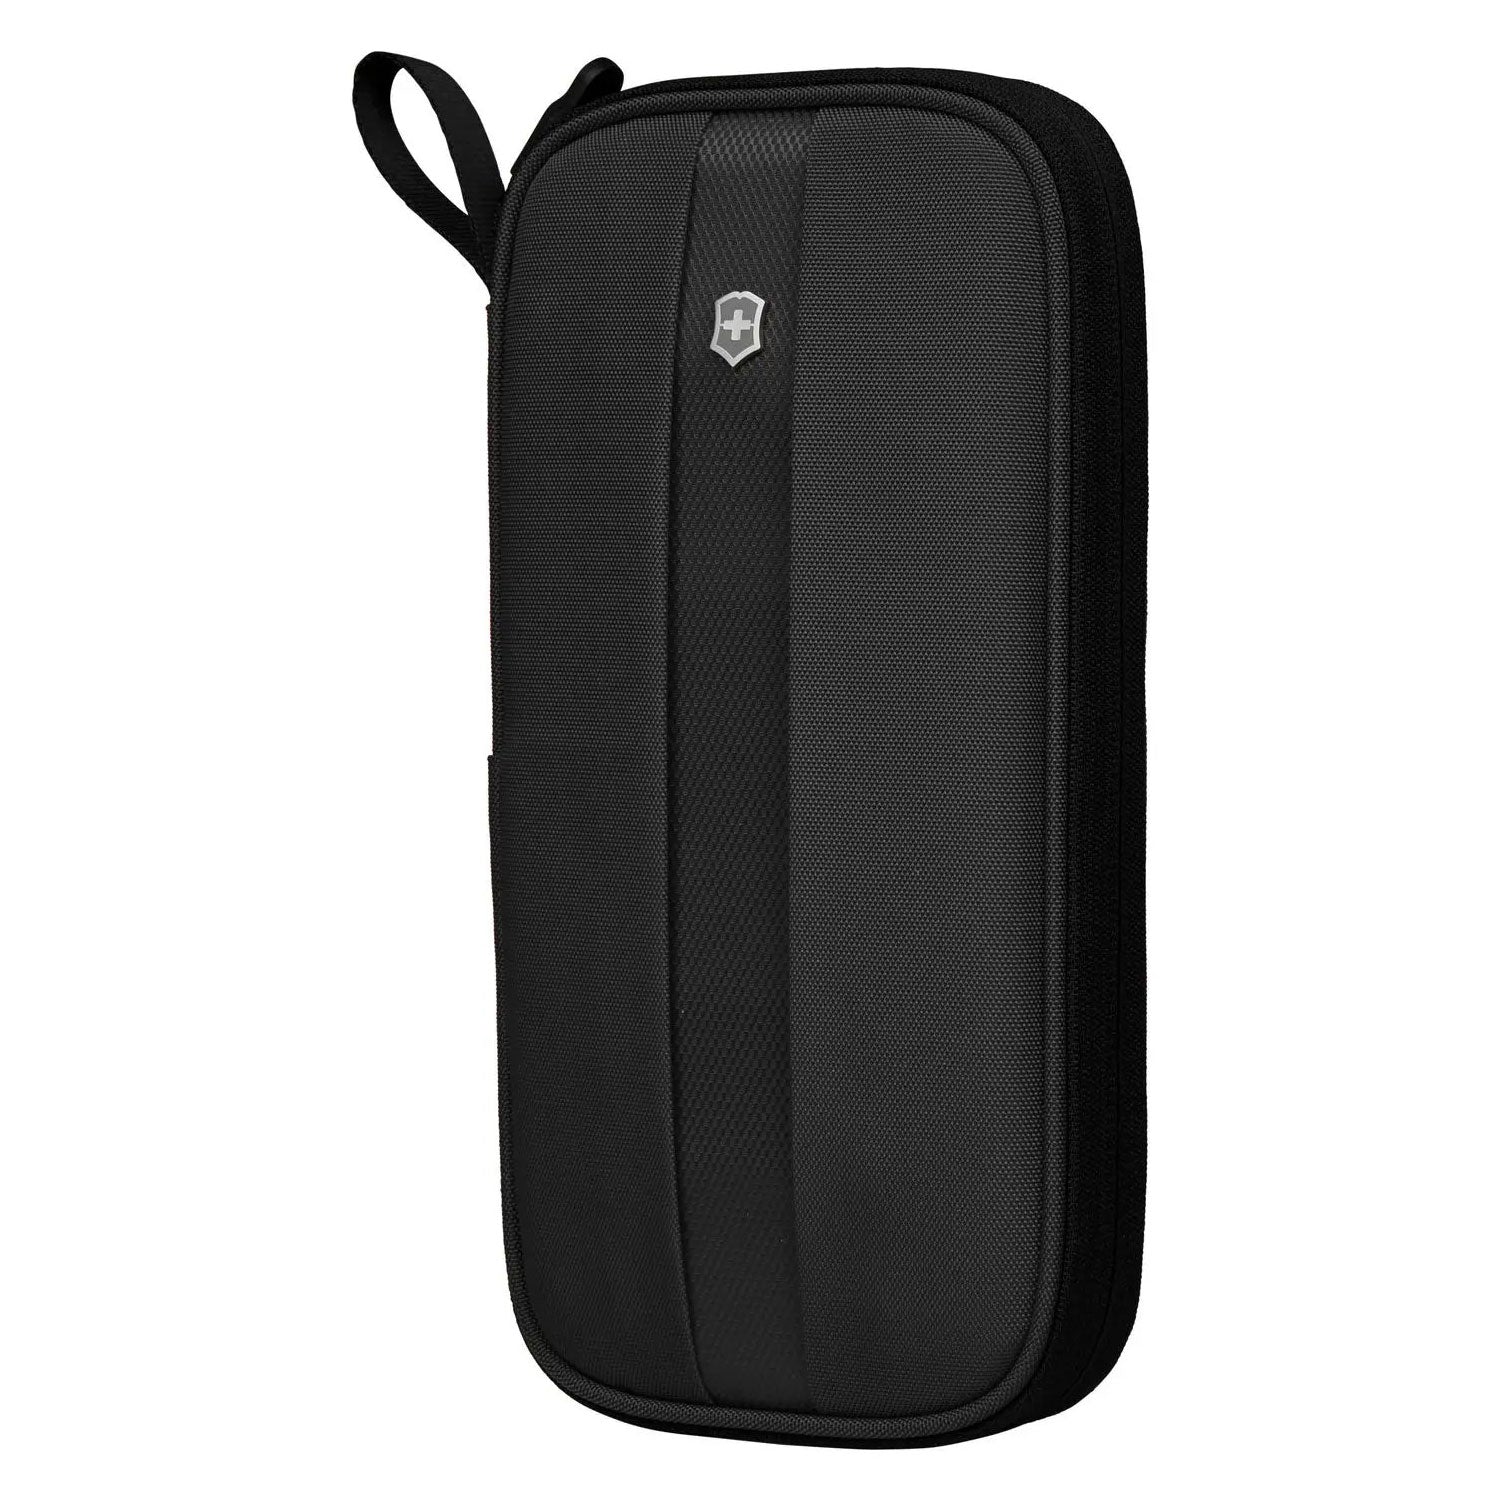 Victorinox Swiss Army Travel Accessories 5.0 Travel Organizer With RFID Protection